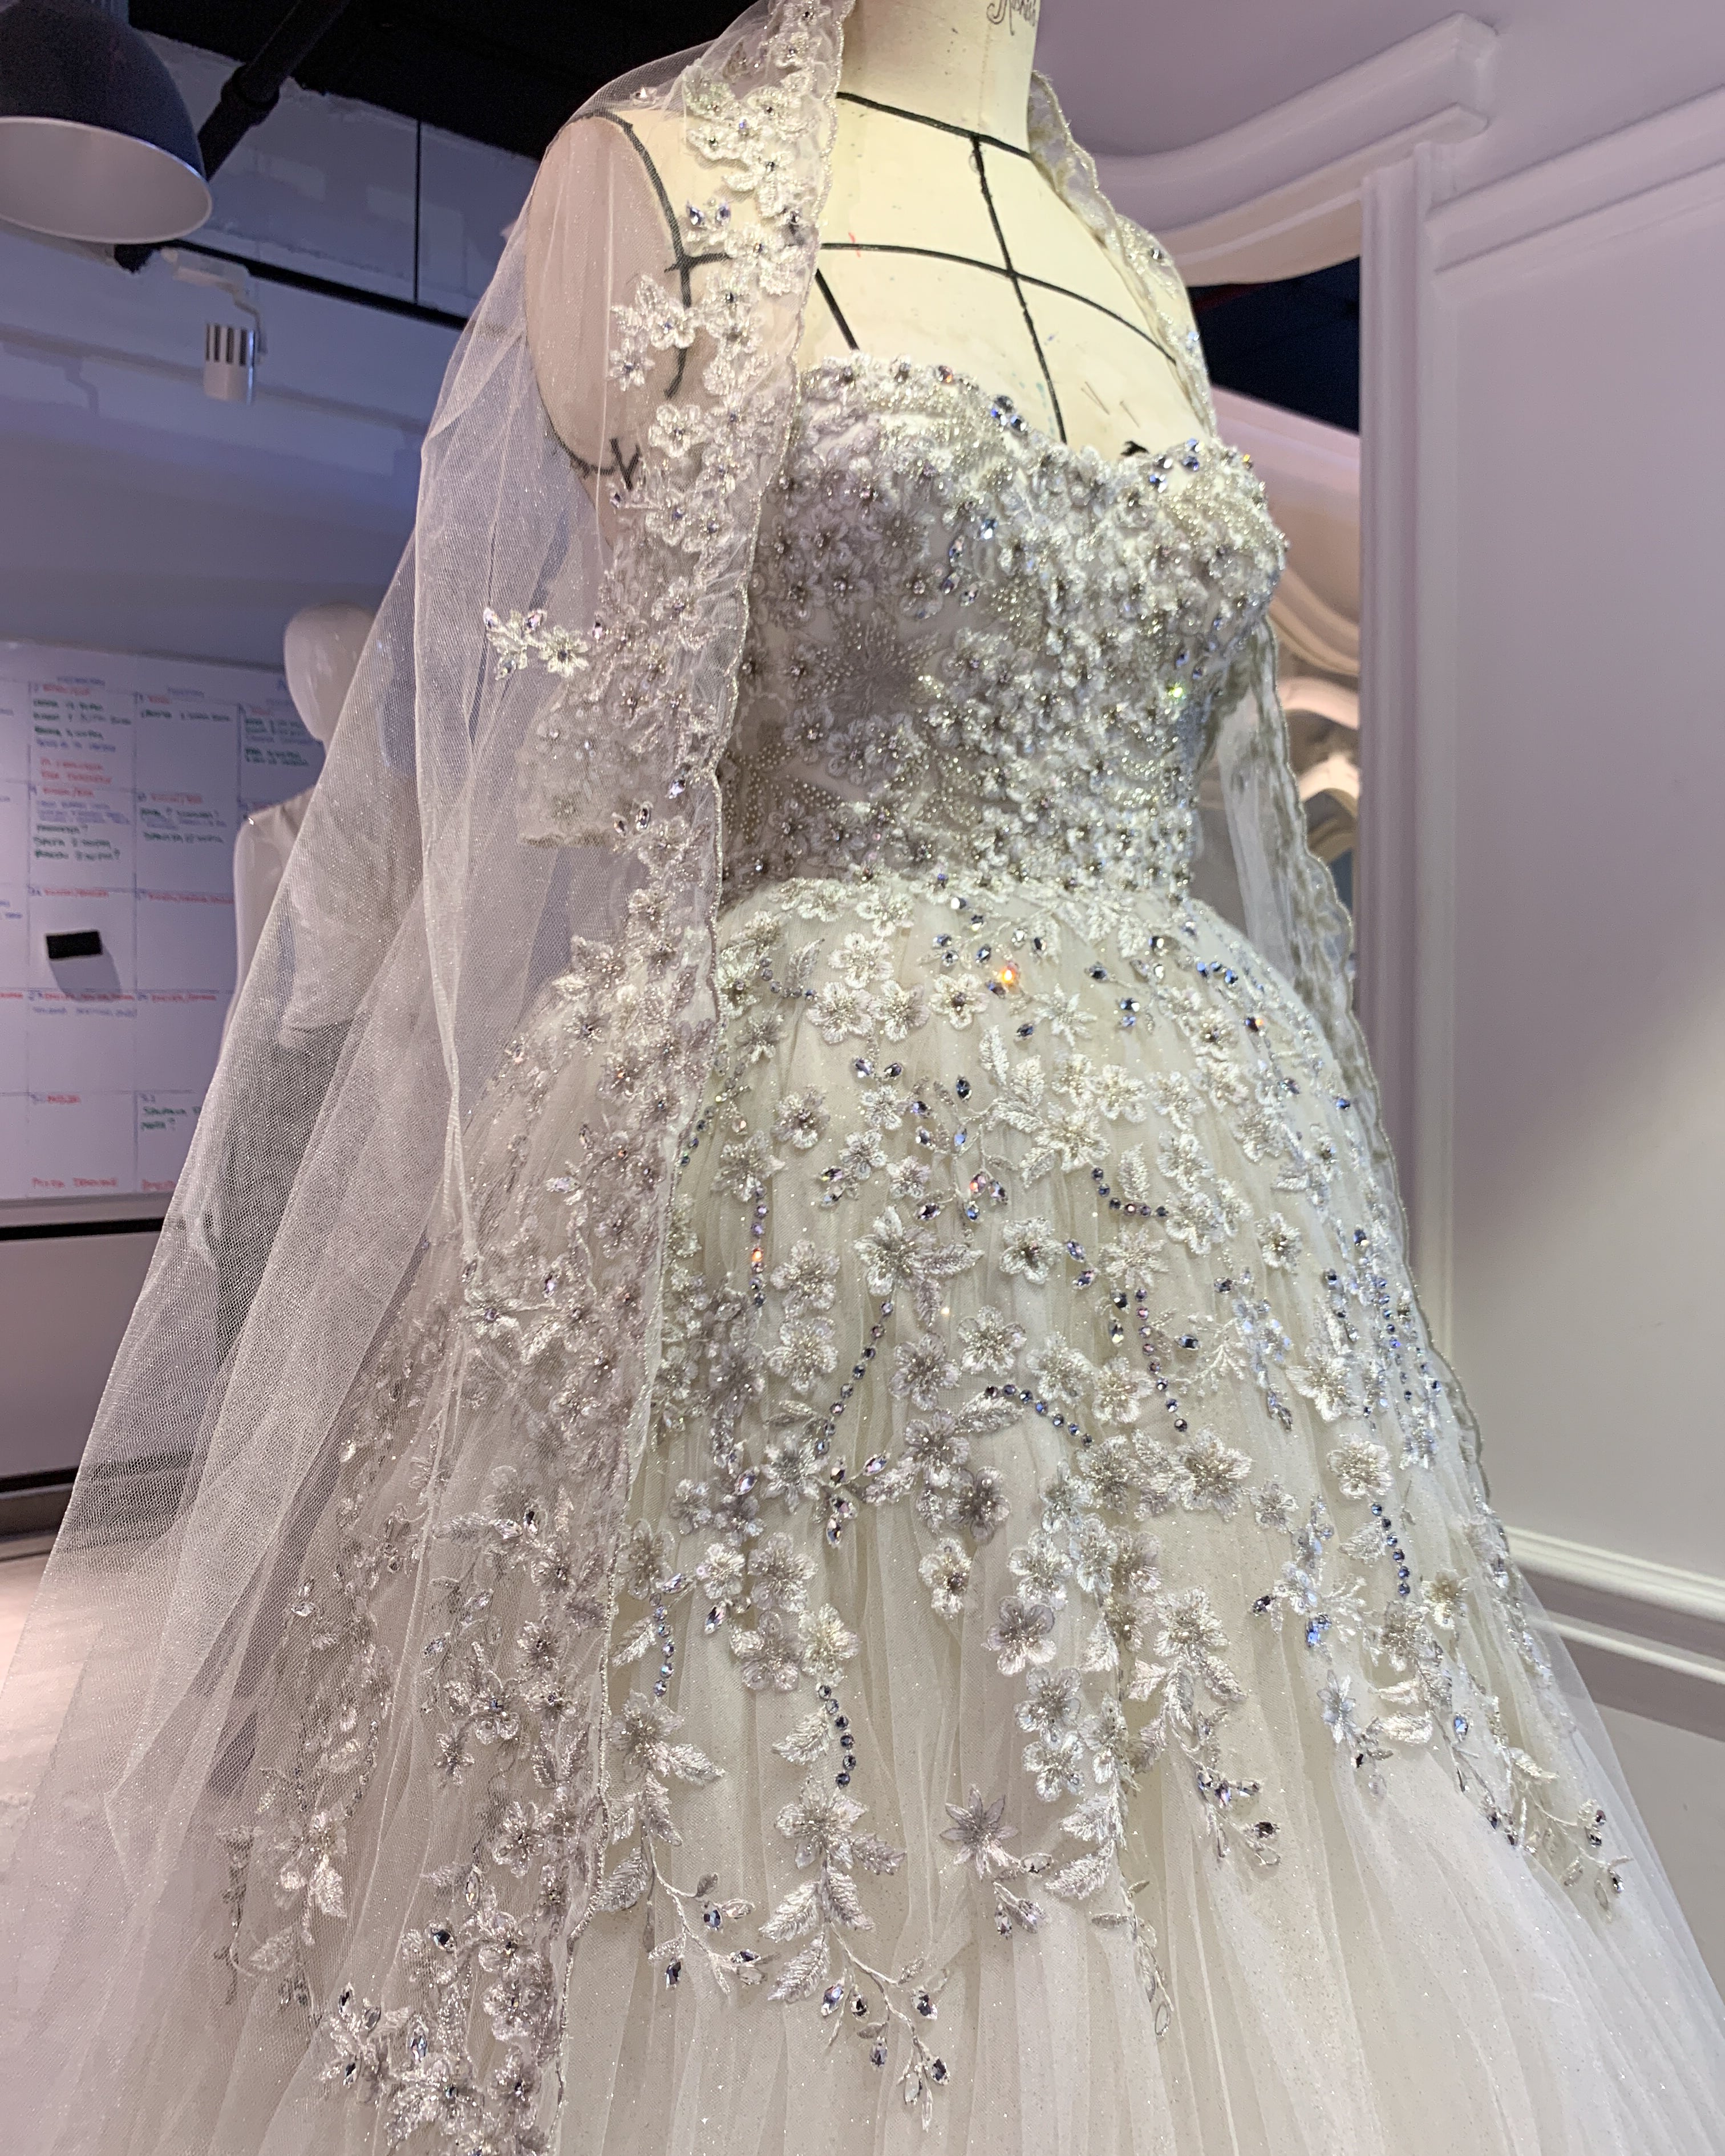 Vintage Dubai Arabic Luxury Wedding Dresses Sexy Bling Beaded Full Lace  Applique Illusion Long Sleeves A Line Chapel Train Bridal Gowns From  Bestoffers, $422.9 | DHgate.Com